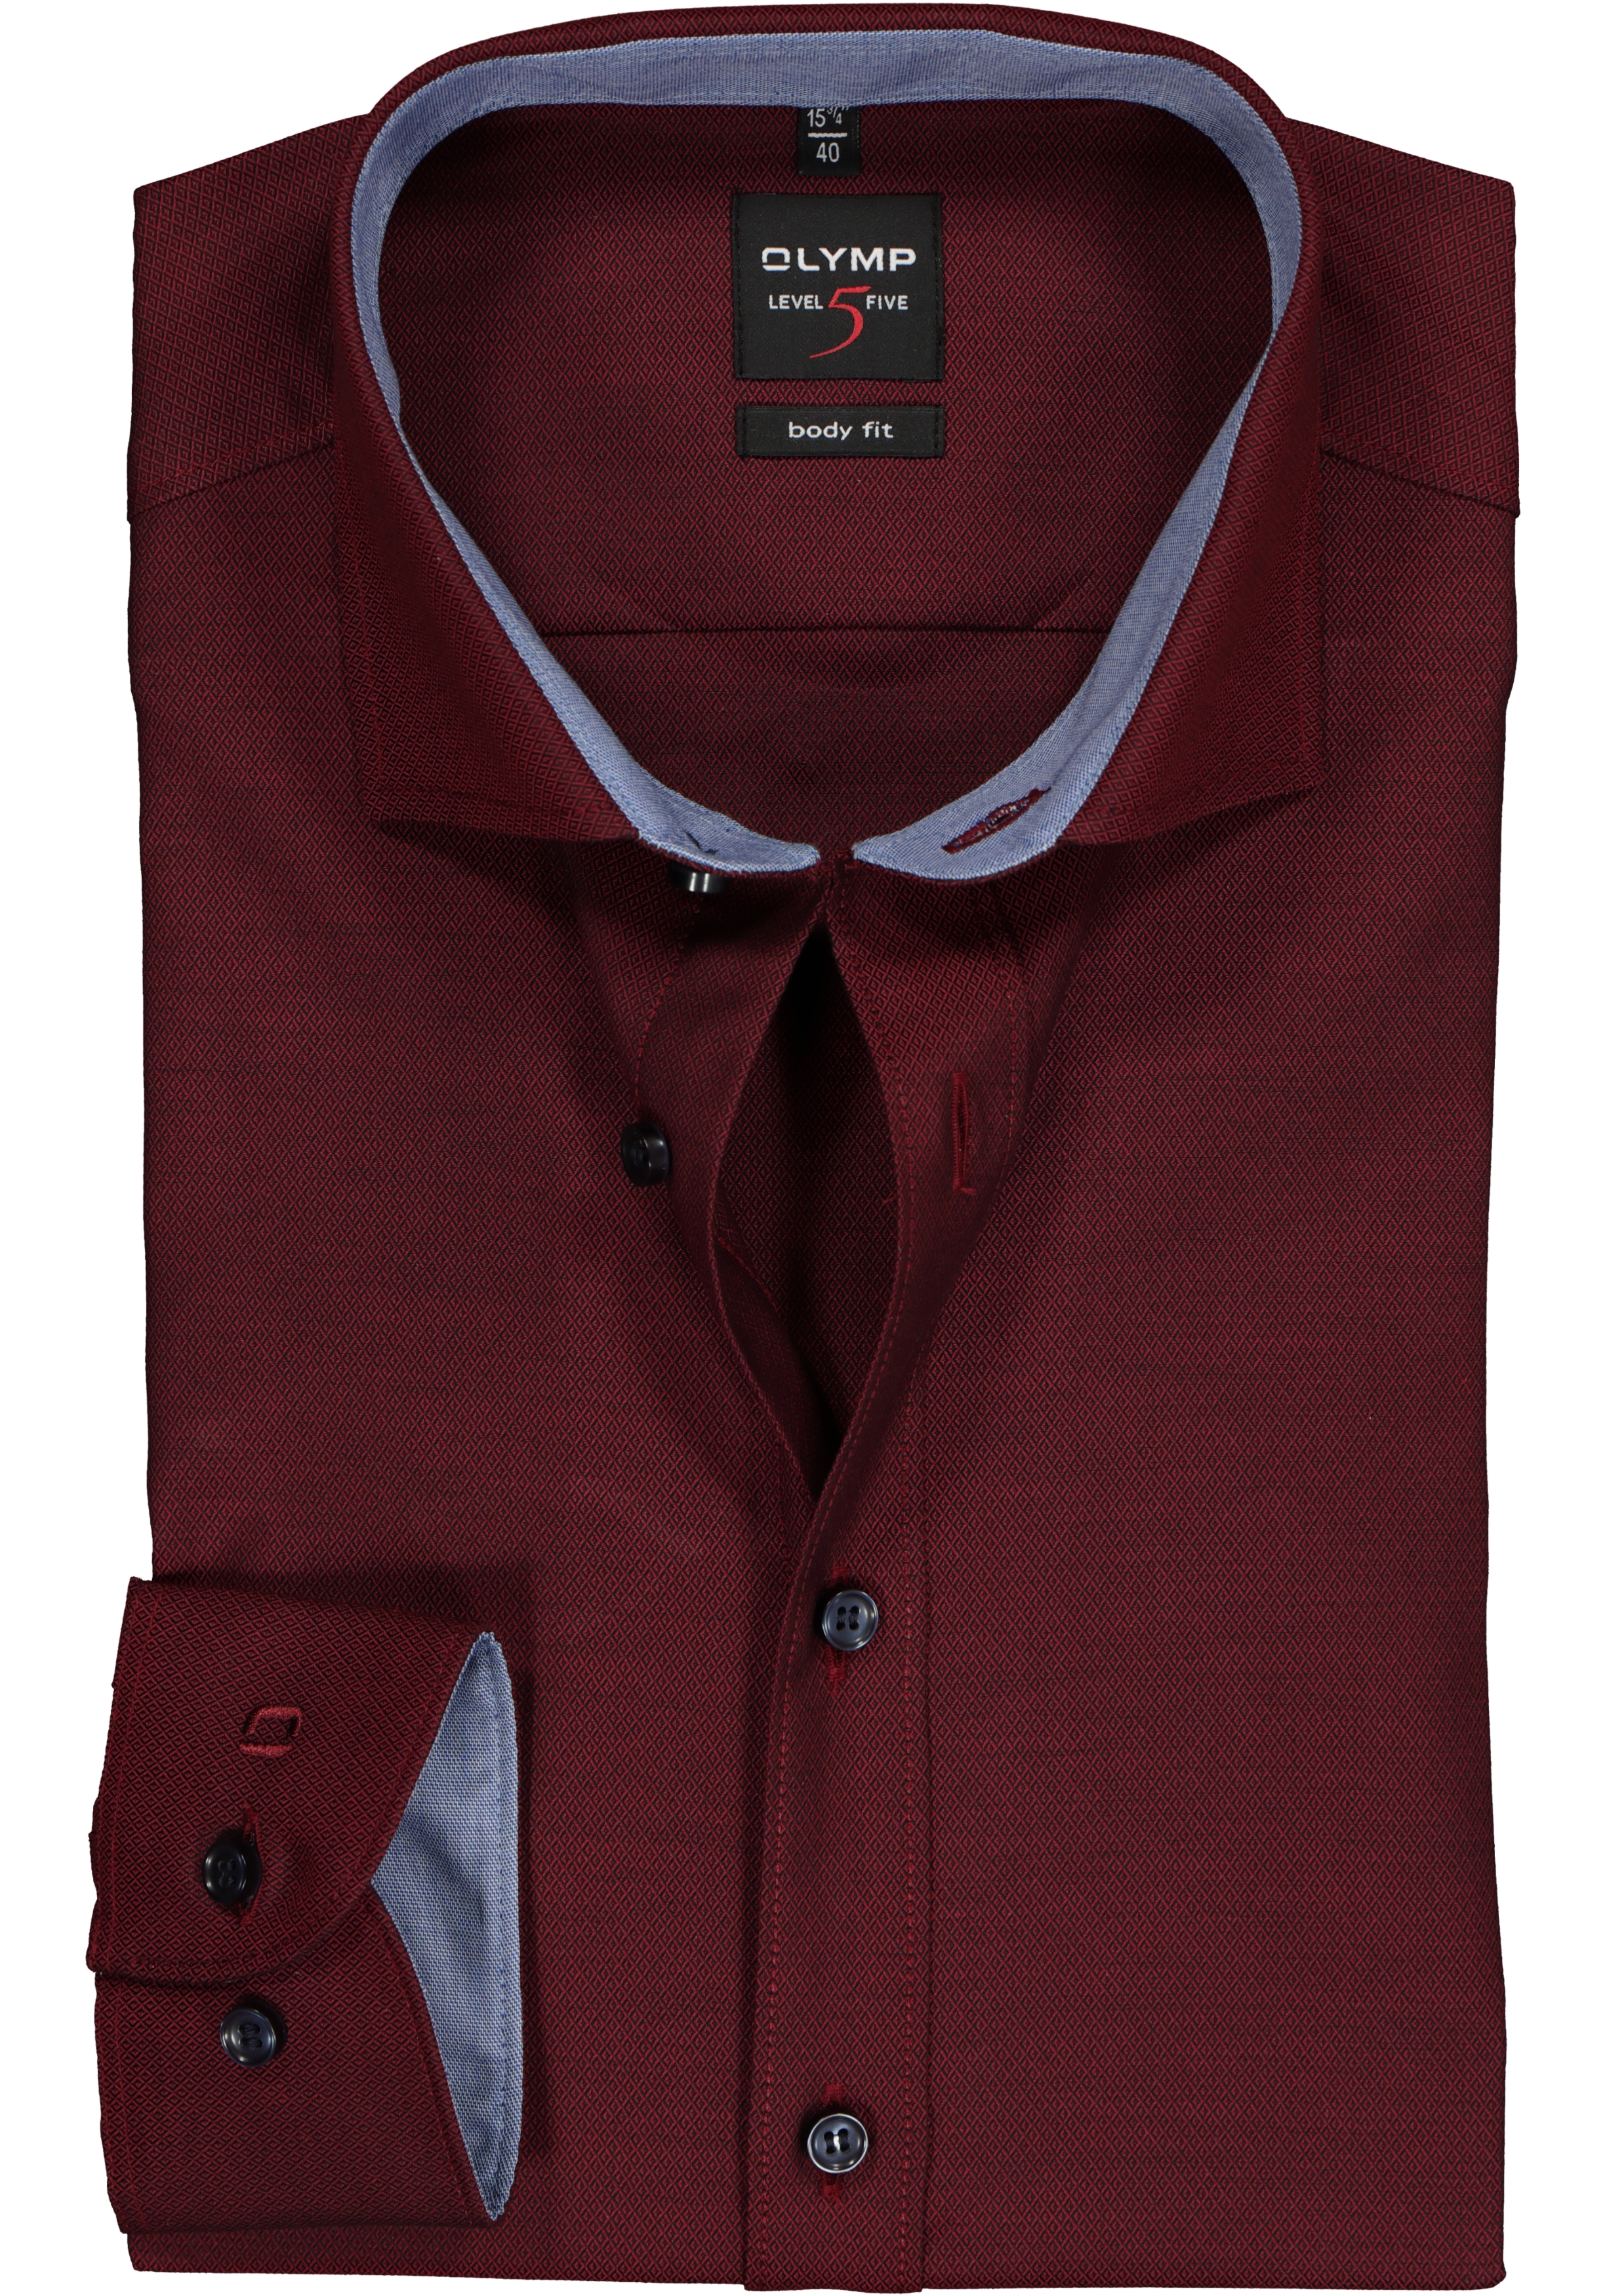 OLYMP Level 5 body fit overhemd, bordeaux rood structuur (blauw contrast)